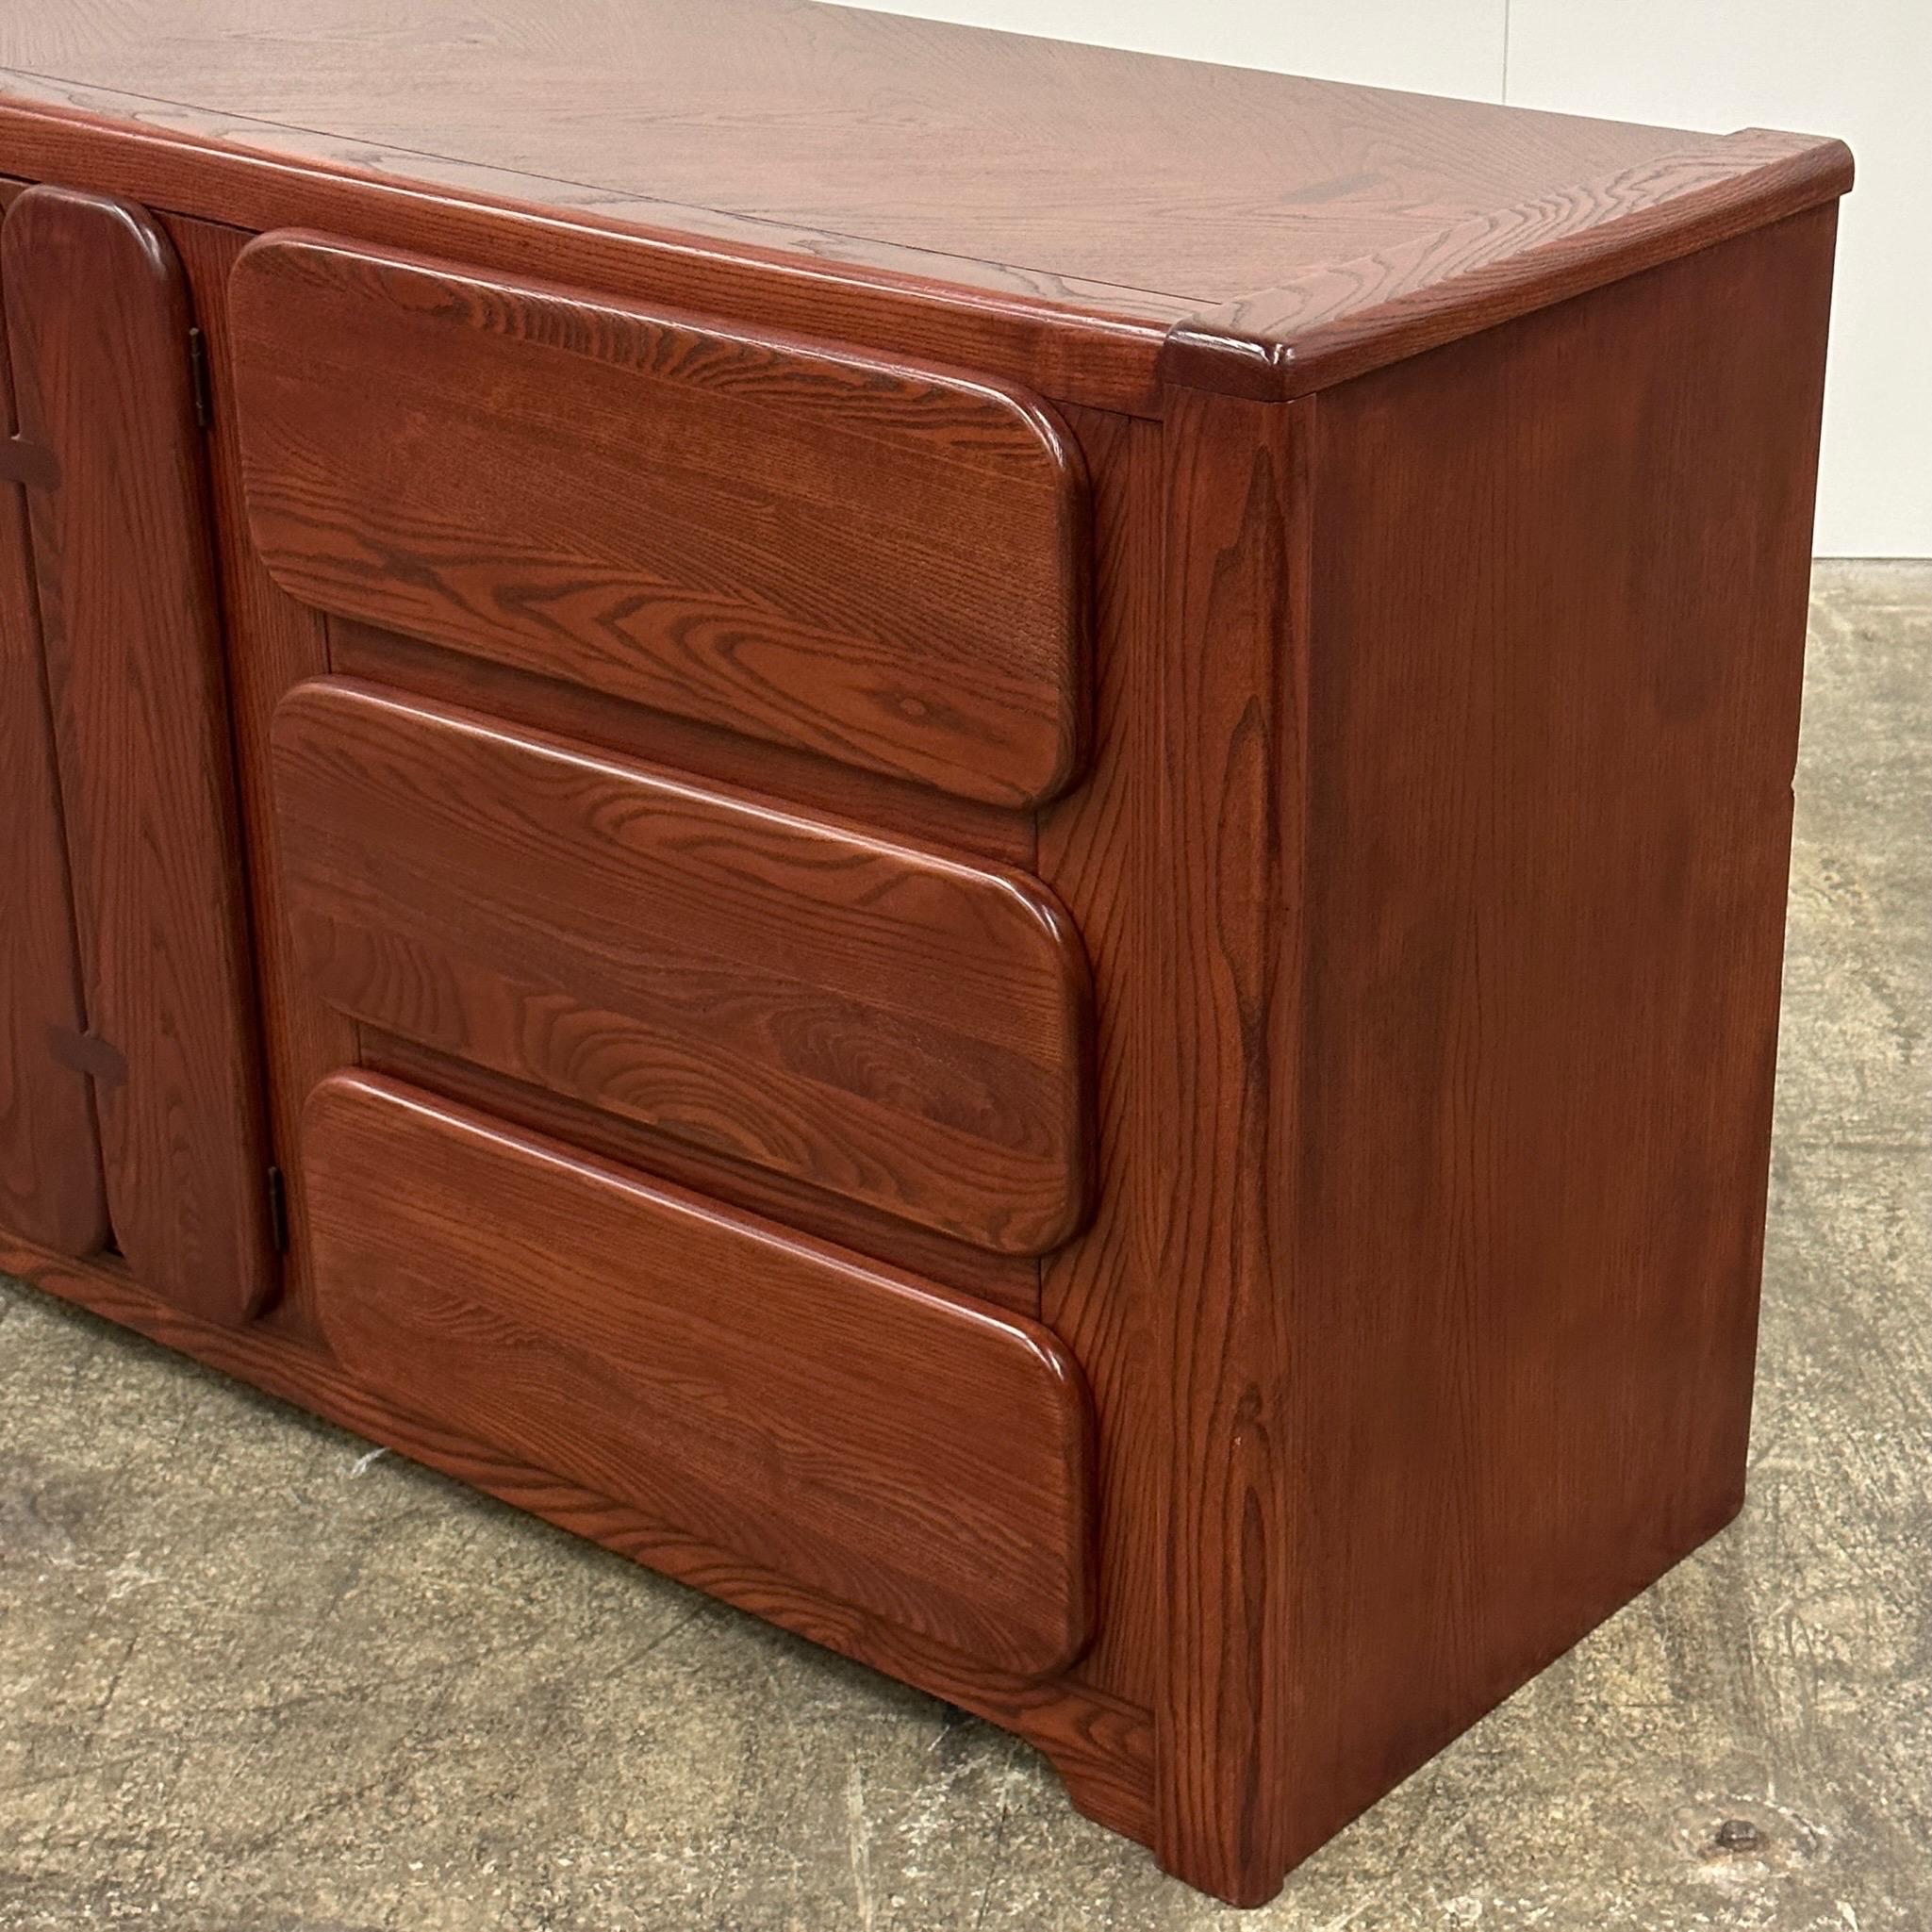 c. 1970s. Made by Stanley. Completely refinished in rosewood color although made of oak. Drawers inside middle cabinet. 